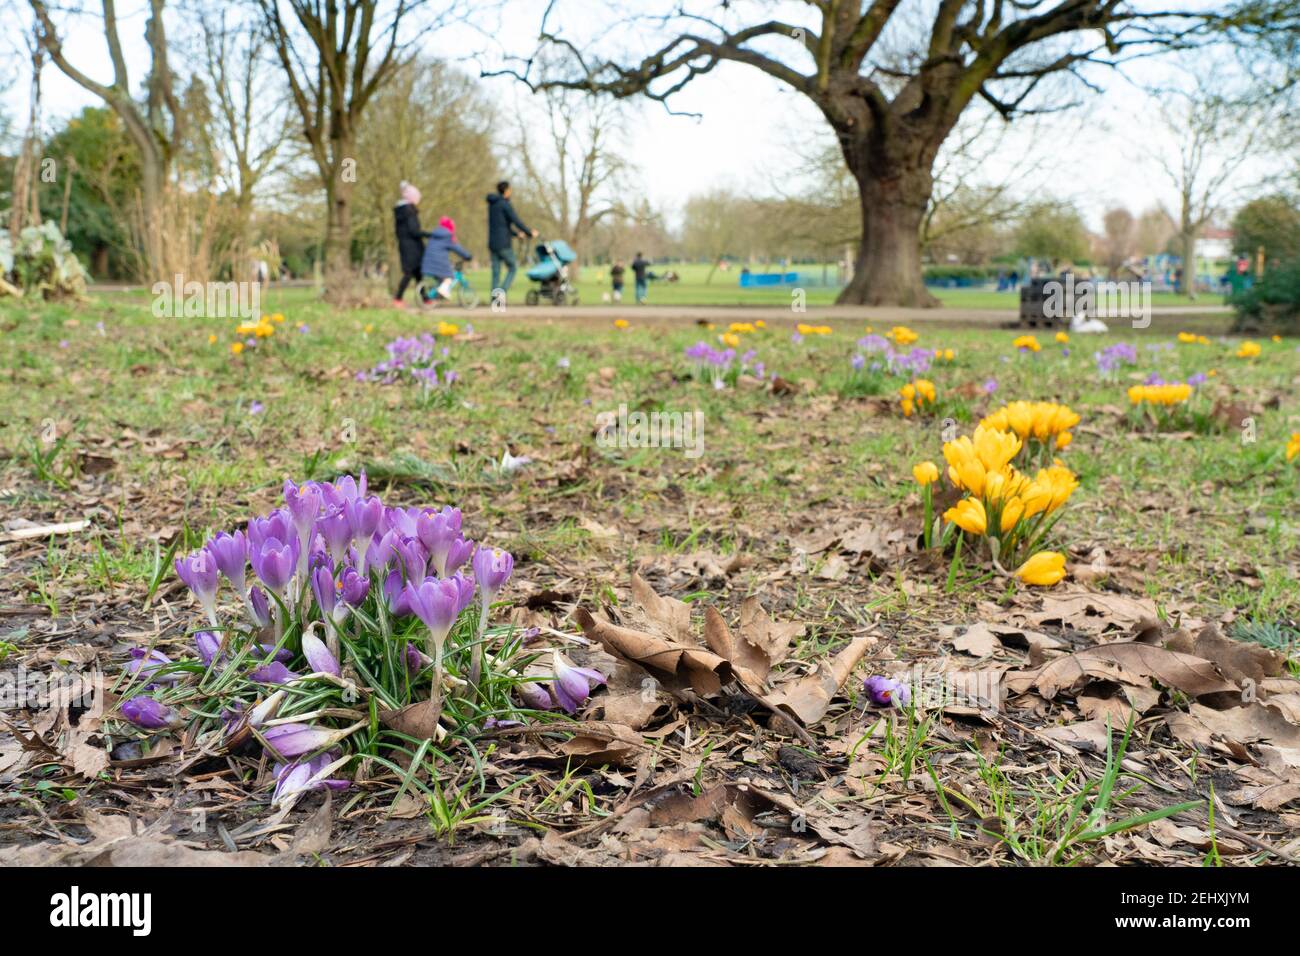 London, UK. 20th Feb, 2021. Wild purple crocuses in Lammas Park in Ealing on an early spring day in London. Photo date: Saturday, February 20, 2021. Photo: Richard Gray/Alamy Live News Stock Photo